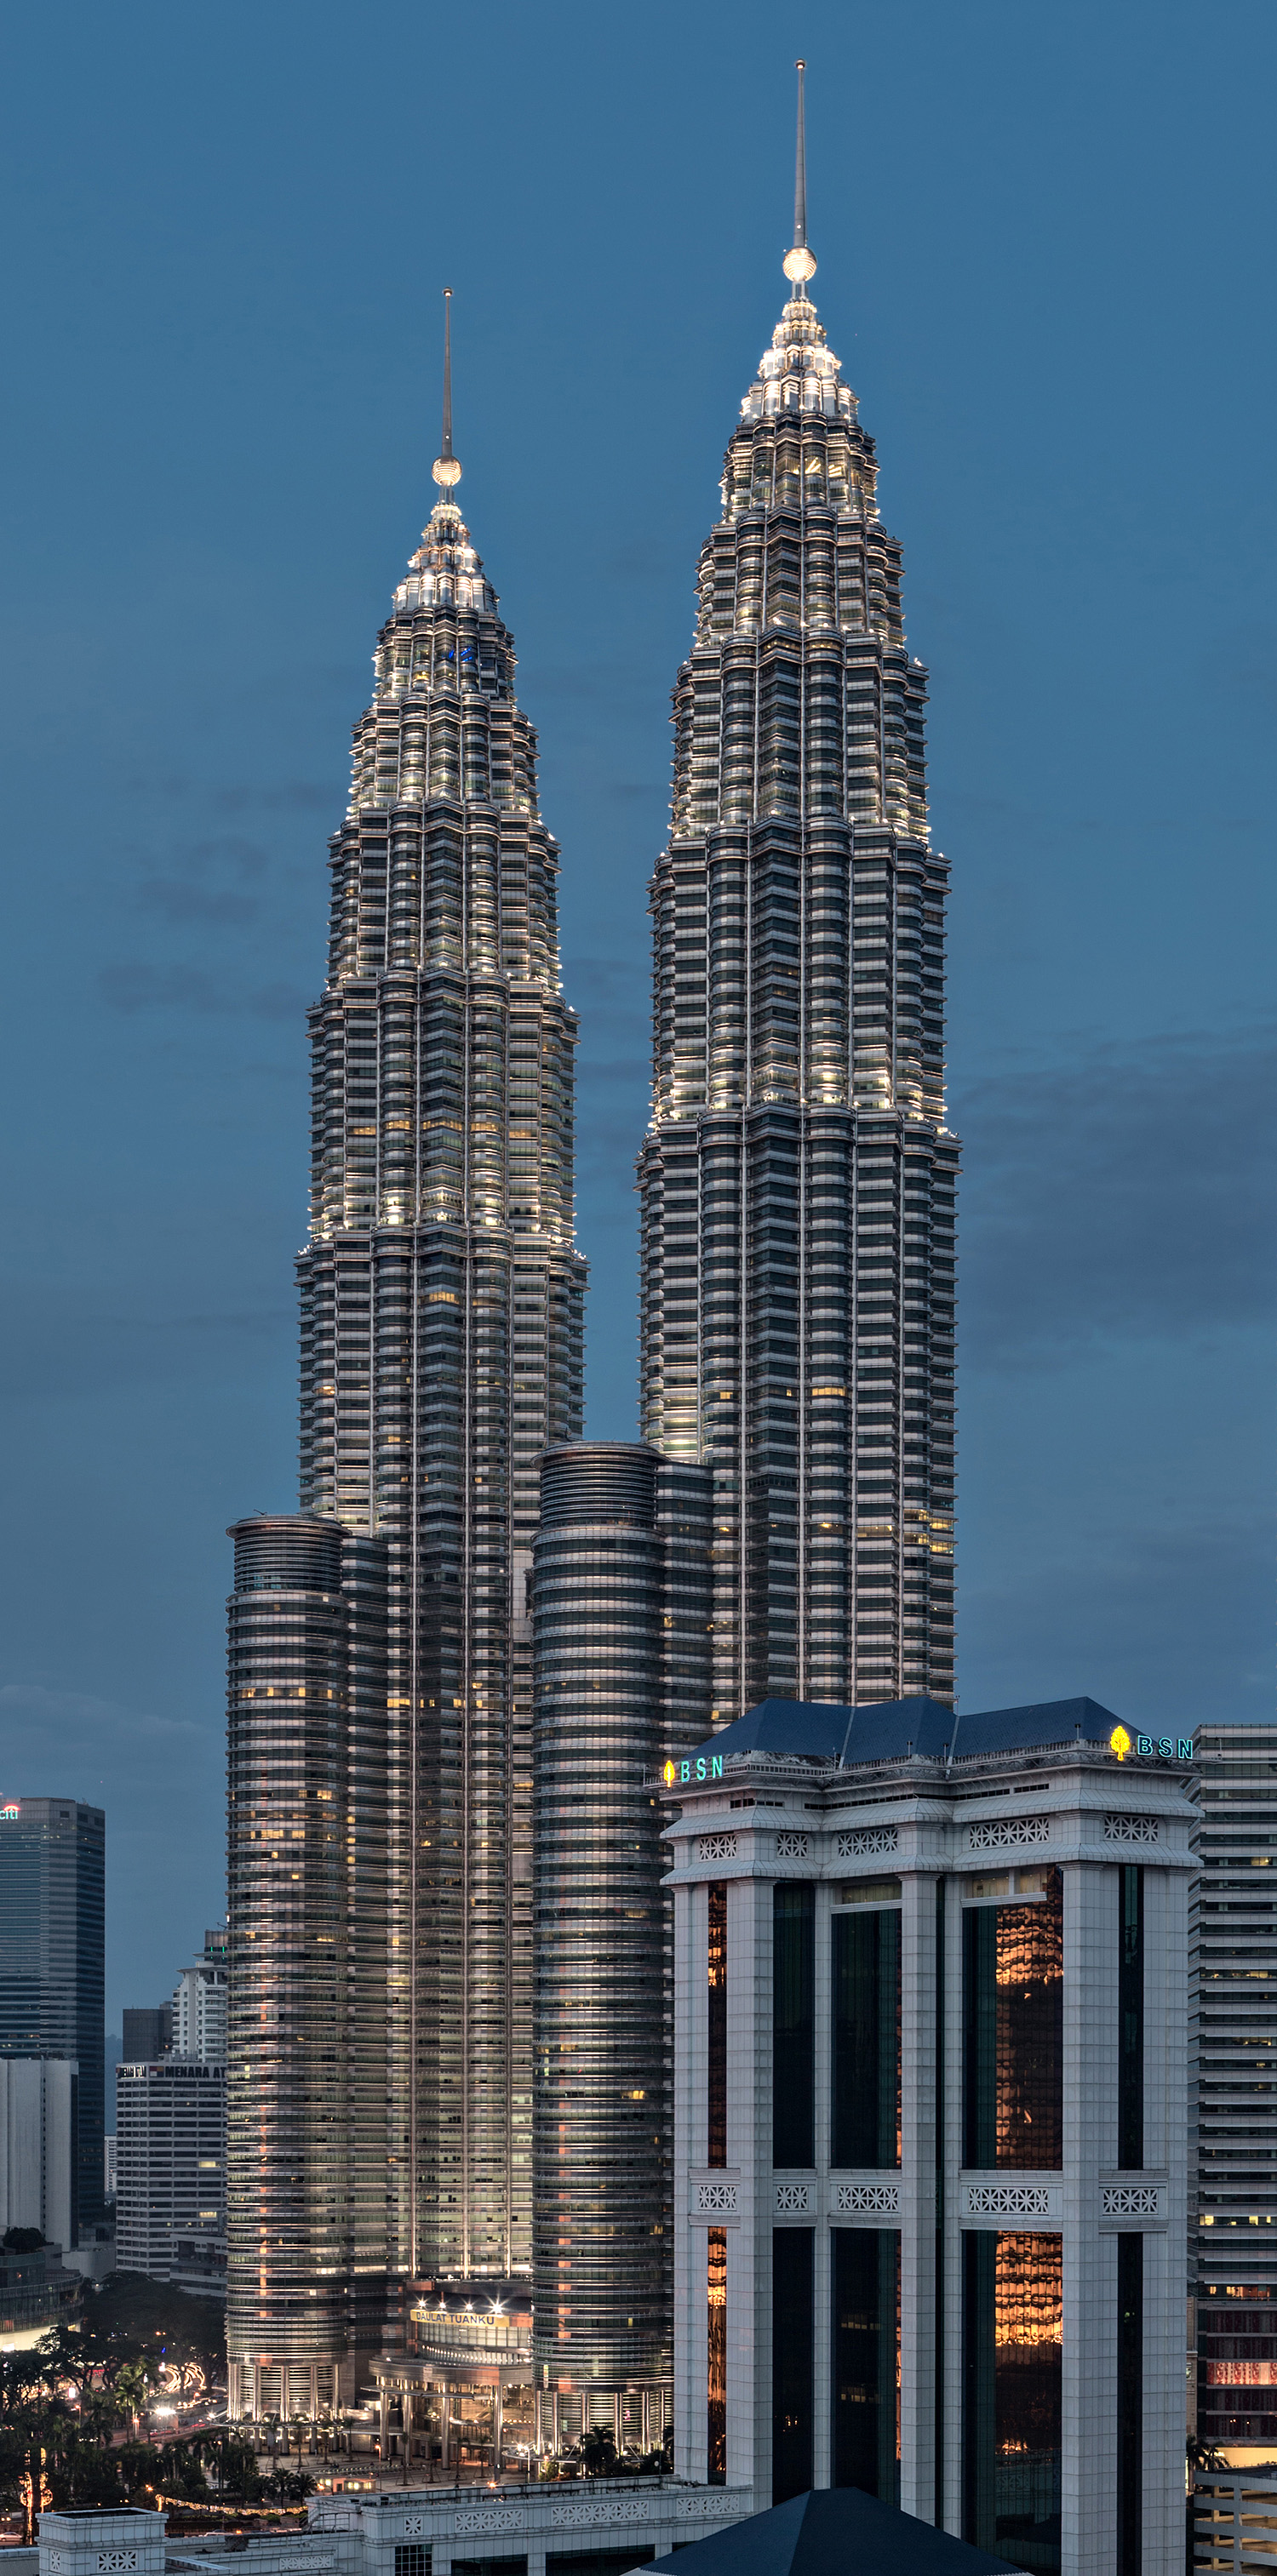 Petronas Twin Tower 1 - View from Renaissance Hotel, Tower 1 is the right tower 